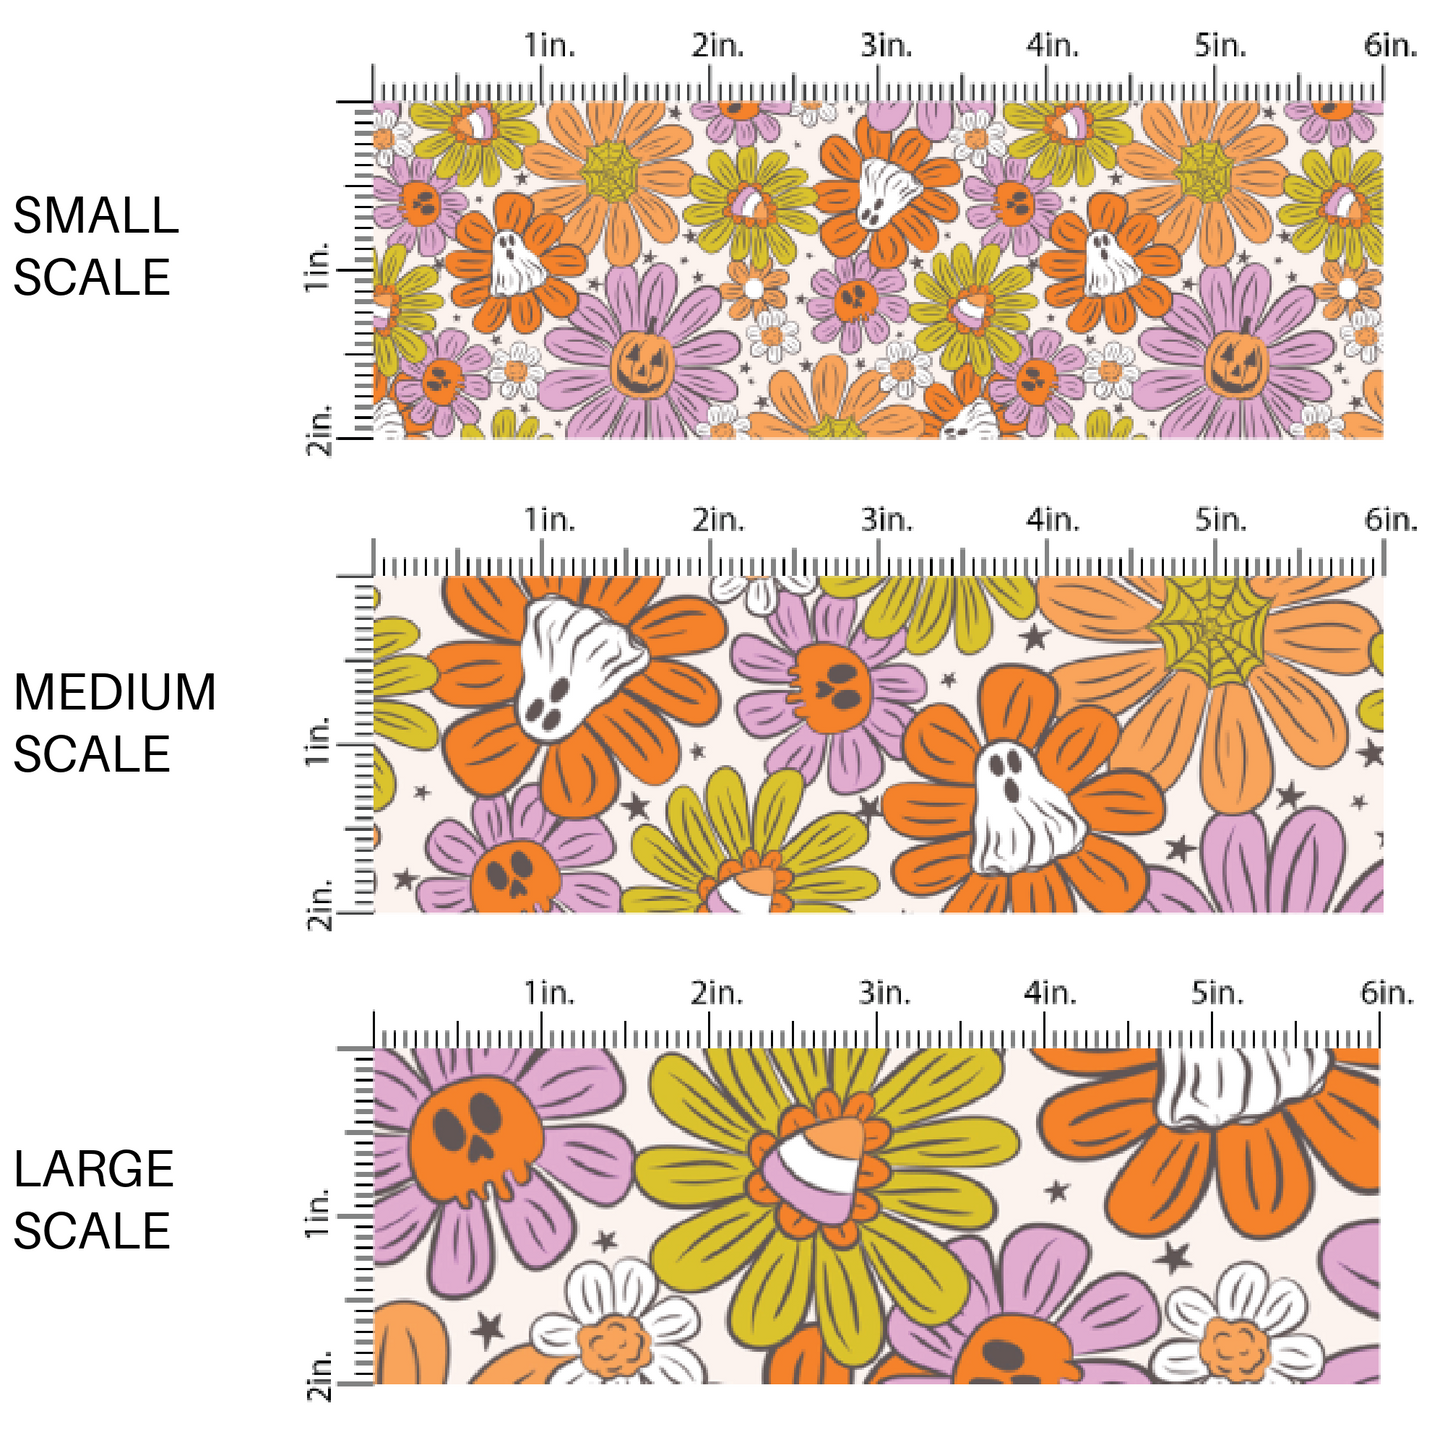 This scale chart of small scale, medium scale and large scale of these Halloween themed pink, yellow, and orange fabric by the yard features small ghost, pumpkins, skulls, and stars on large bright daisies in pink, yellow, and orange. This fun spooky themed fabric can be used for all your sewing and crafting needs! 